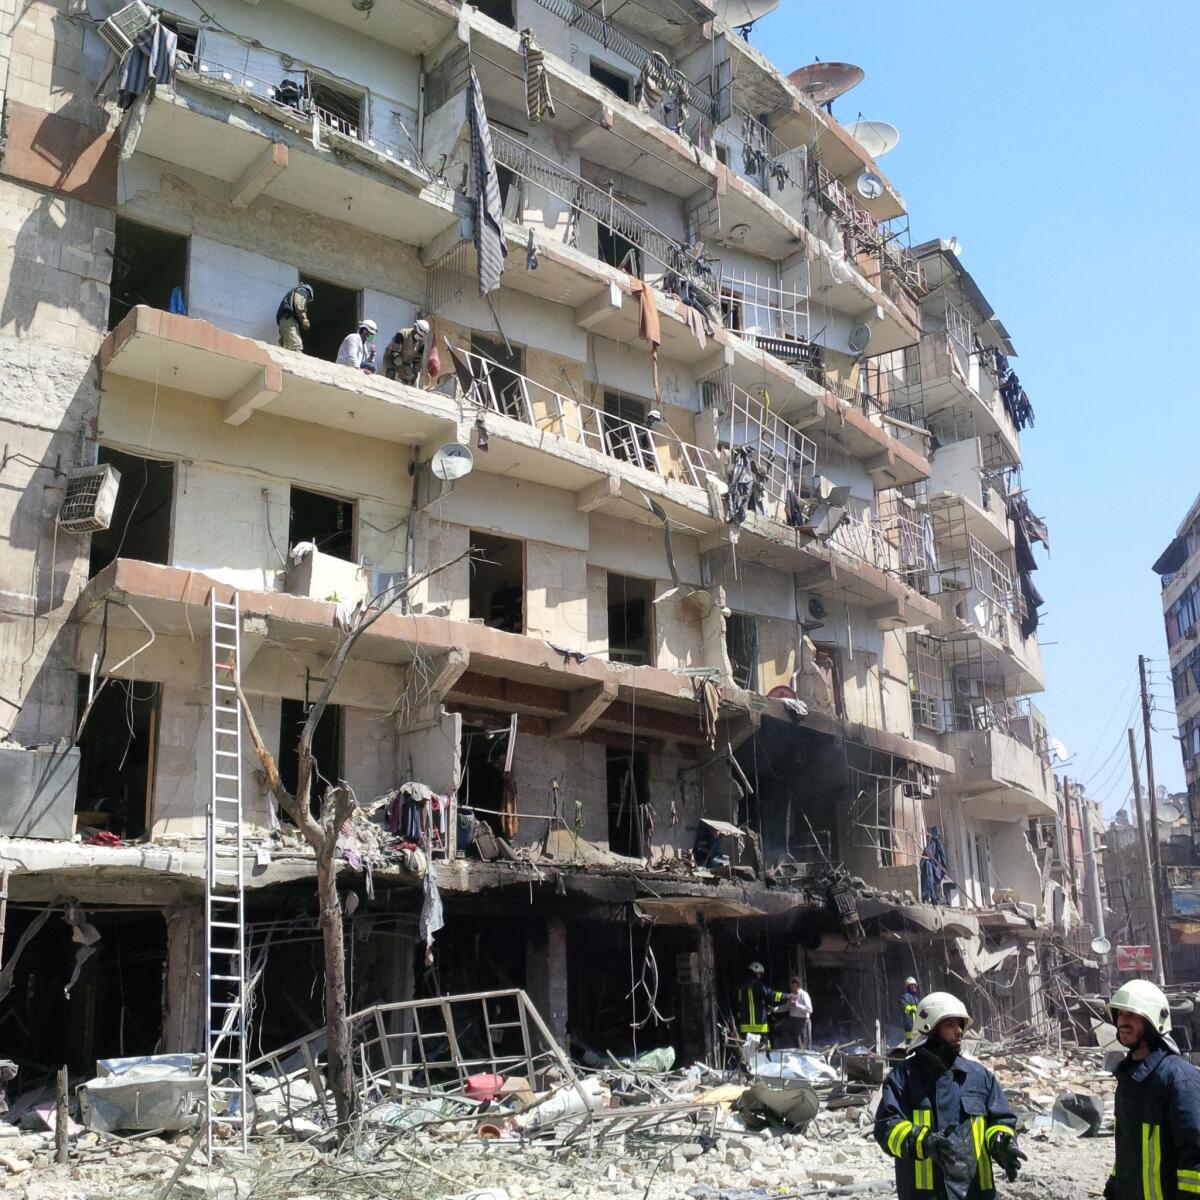 For more than three months, Aleppo's opposition-held neighborhoods and surrounding suburbs have been terrorized nearly daily by barrel bombs unleashed from helicopters. The bombs, TNT-filled oil drums that can level buildings, have killed more than 2,000 people, activists estimate.